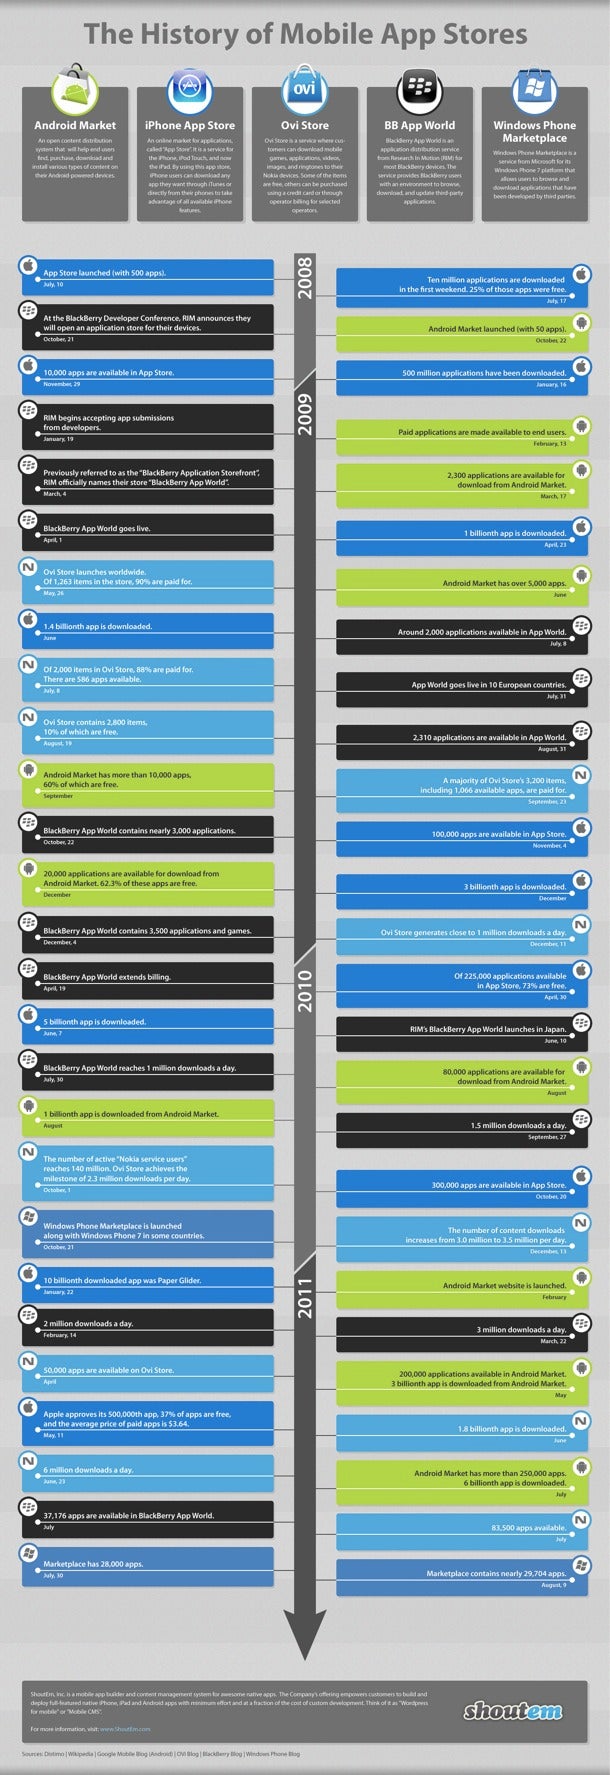 Timeline of the mobile app store industry - Timeline of mobile app stores in graphic form